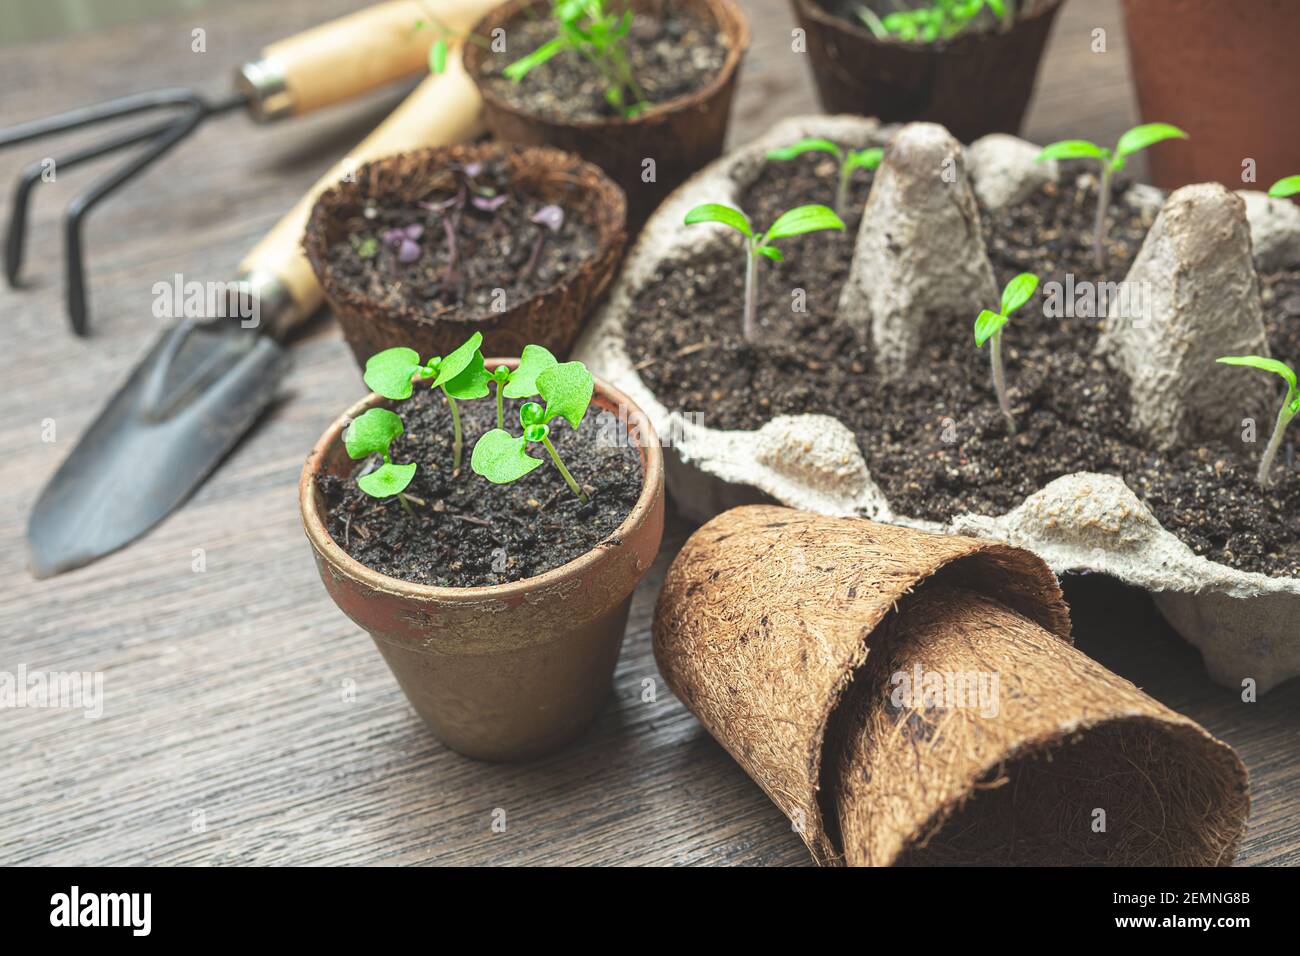 Basil, watercress, tomato seedlings in ecological organic pots and gardening tools on the table, home gardening and growing your own food at home Stock Photo